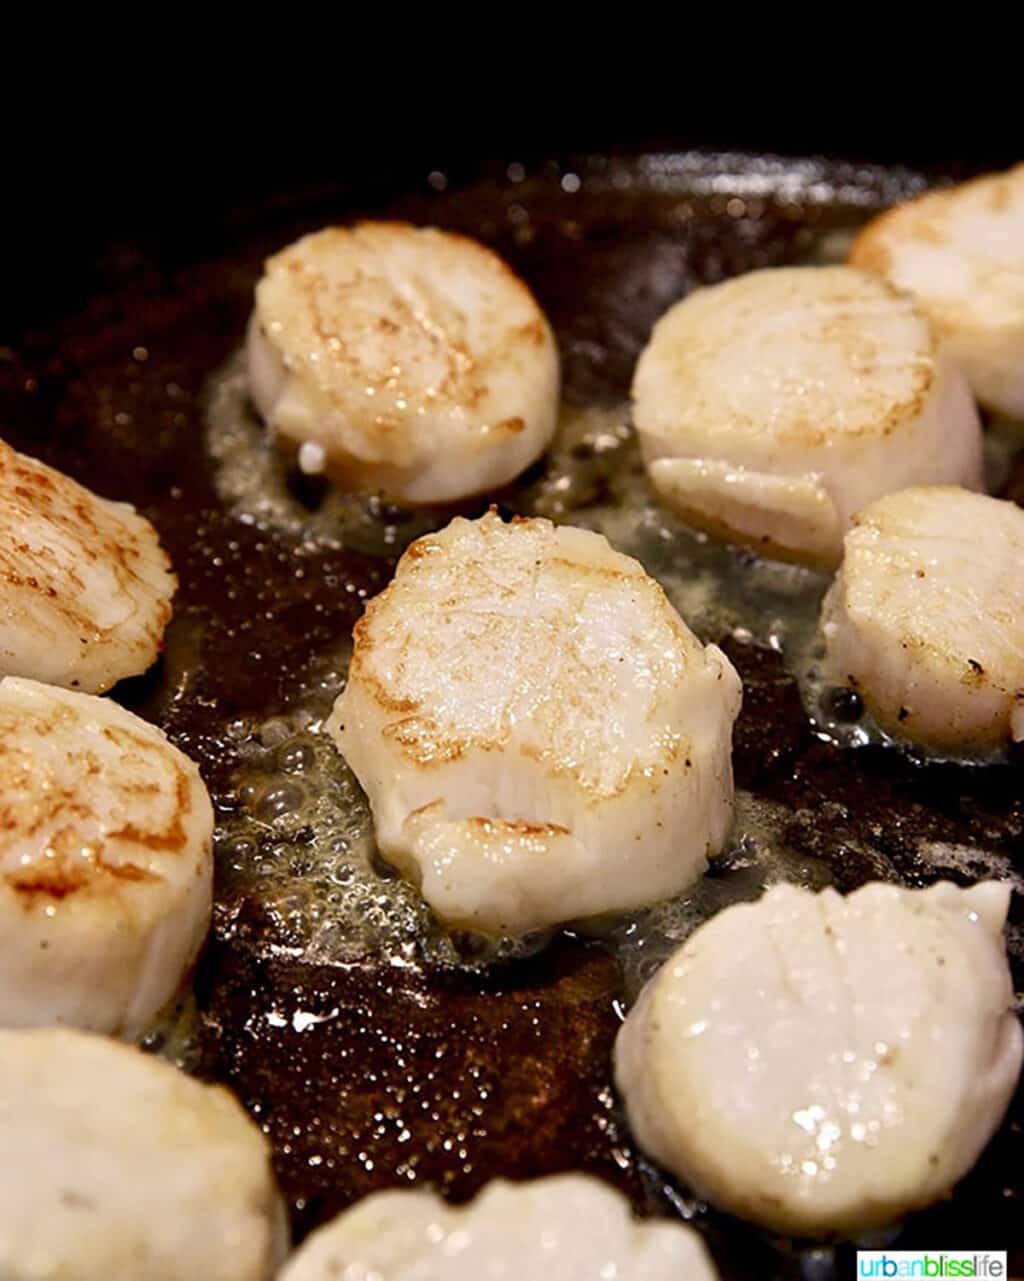 scallops searing in skillet